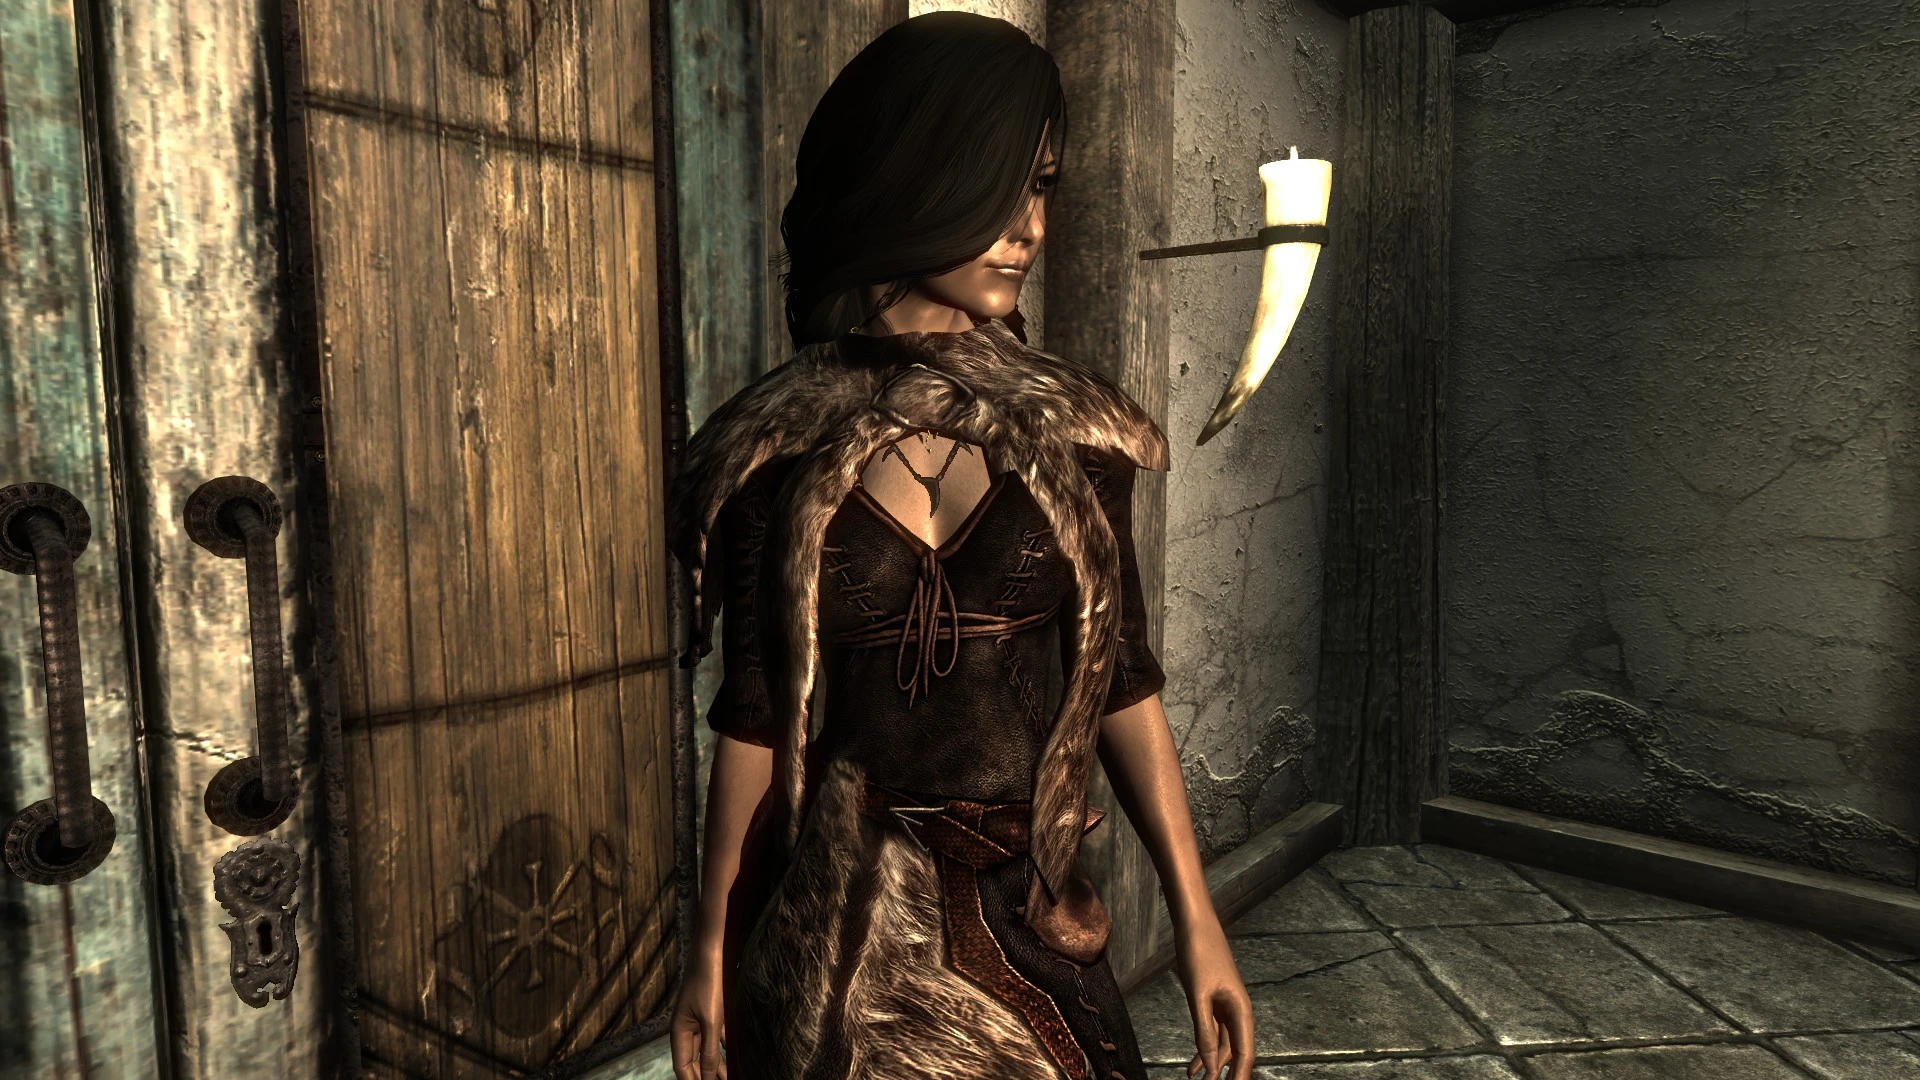 wip warchief armor female version at skyrim nexus mods and community.